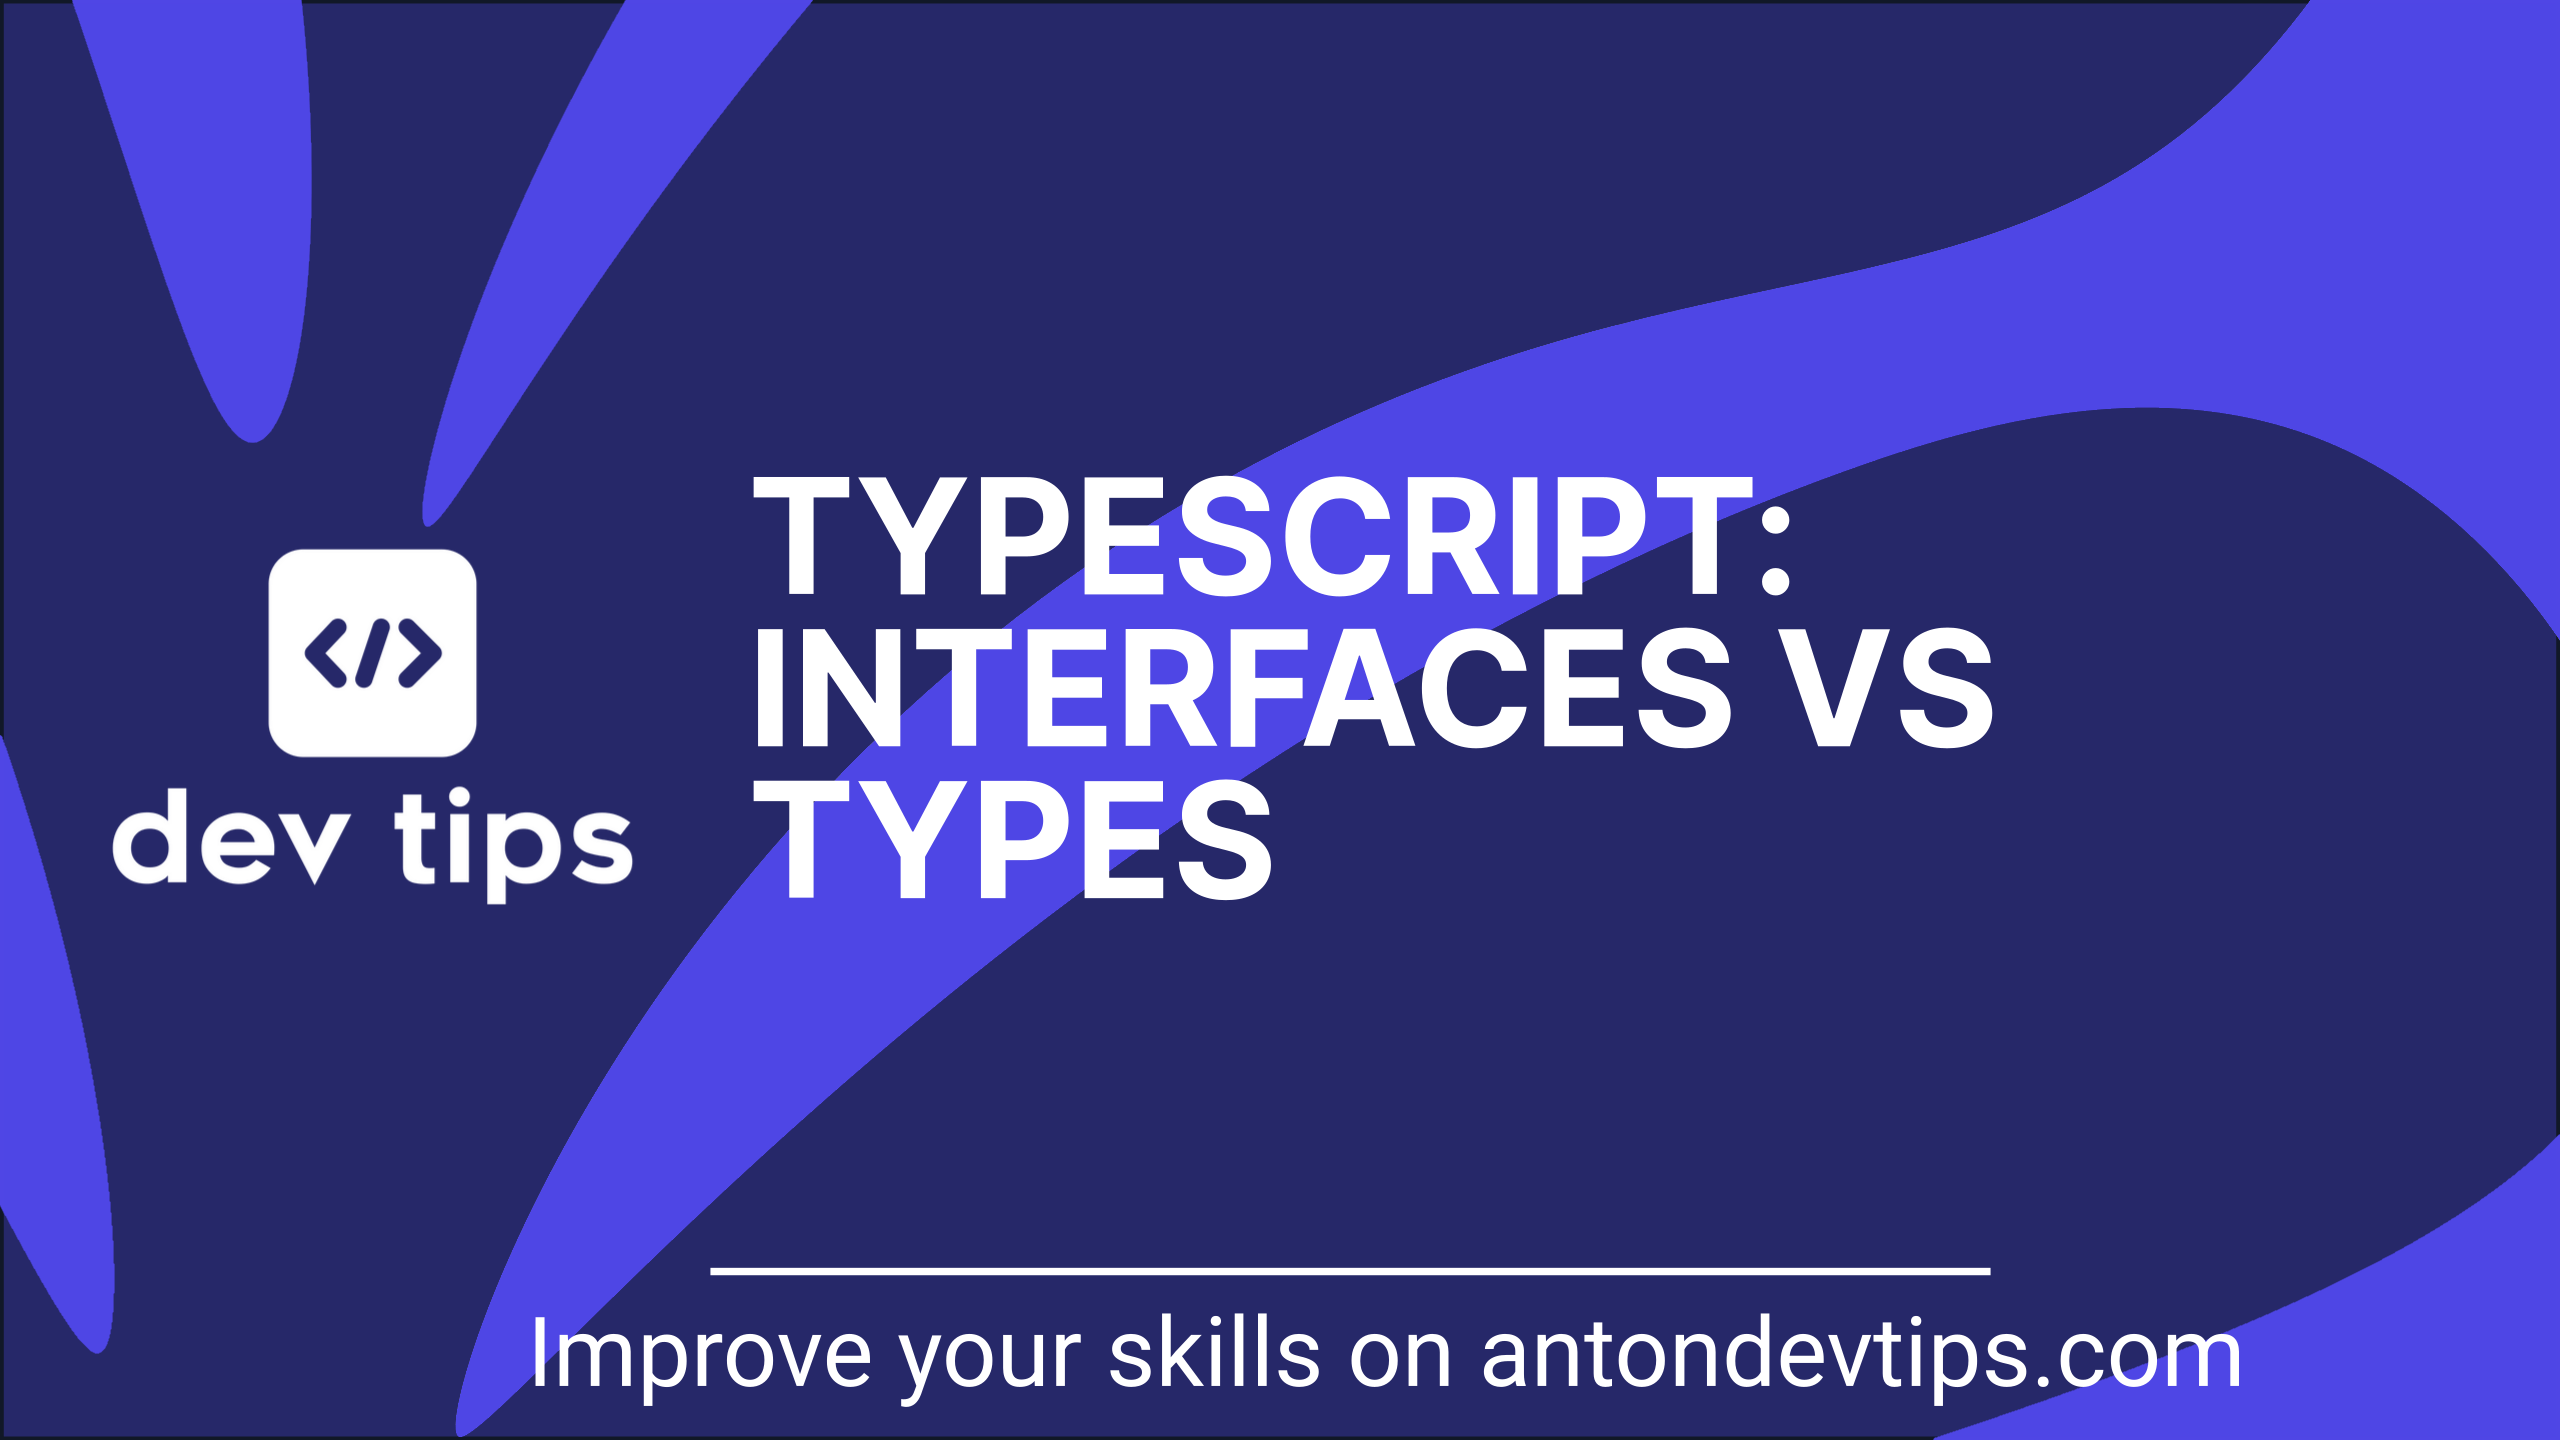 TypeScript: Interfaces vs Types - Understanding the Difference